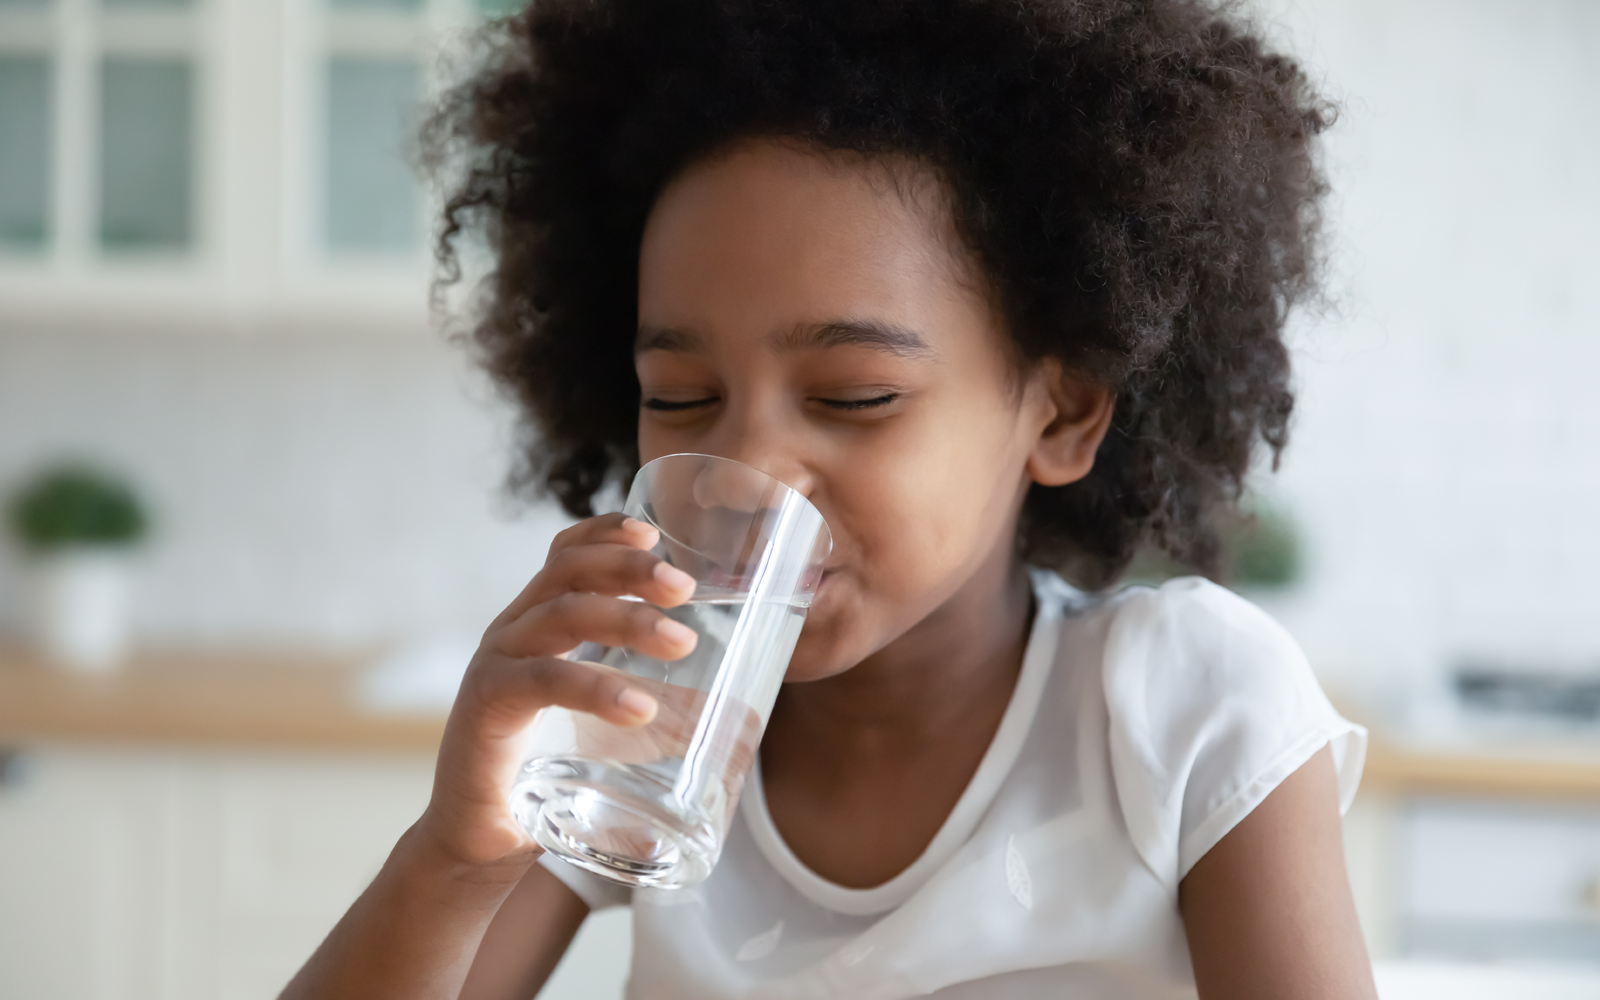 Young African American girl drinks a glass of clean water in kitchen